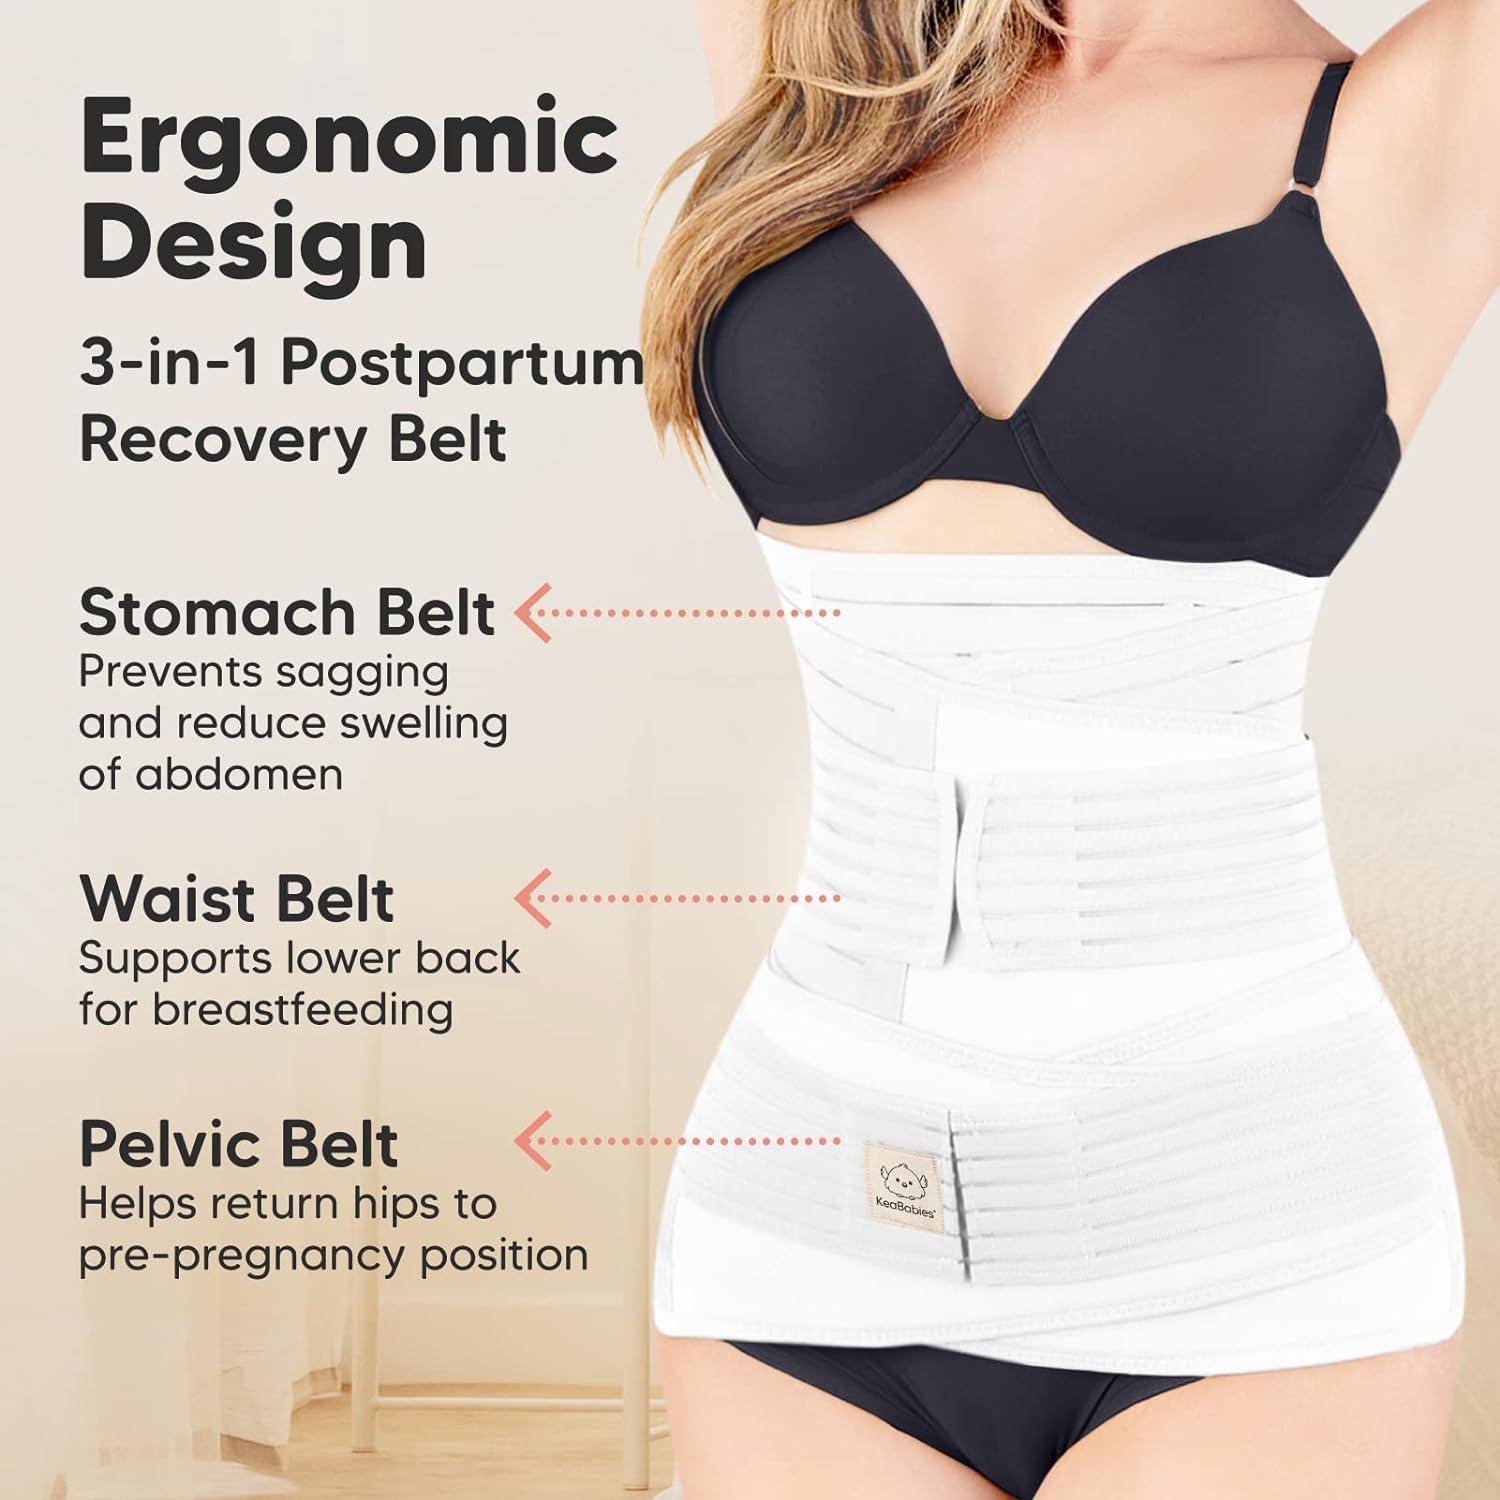 Postpartum support belts and garments